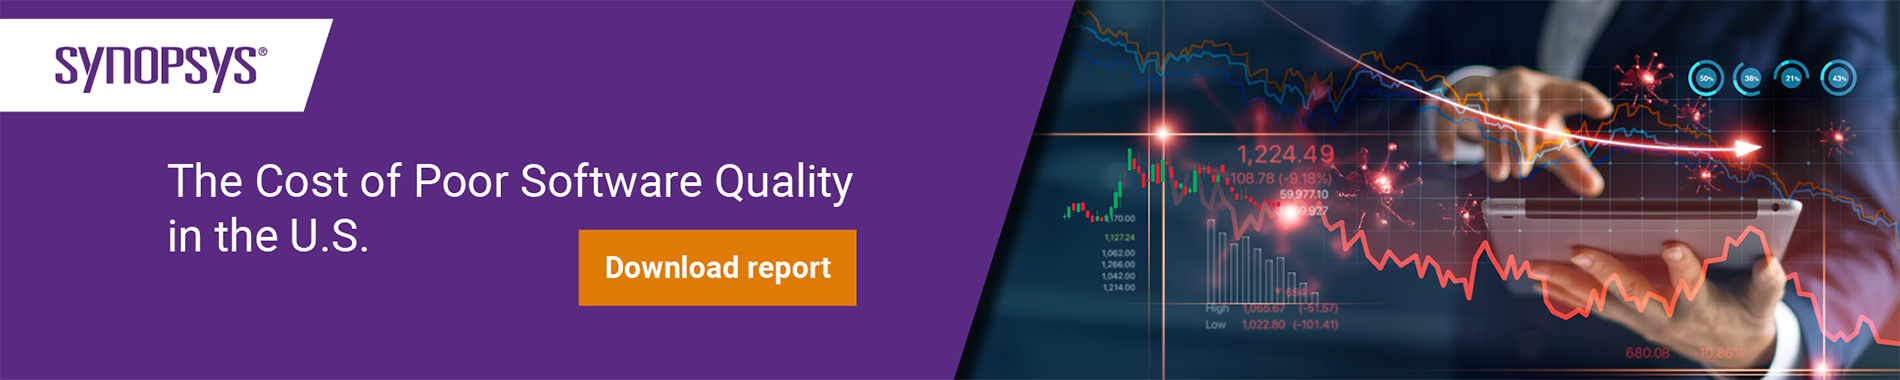 The Cost of Poor Software Quality in the U.S. report | Synopsys